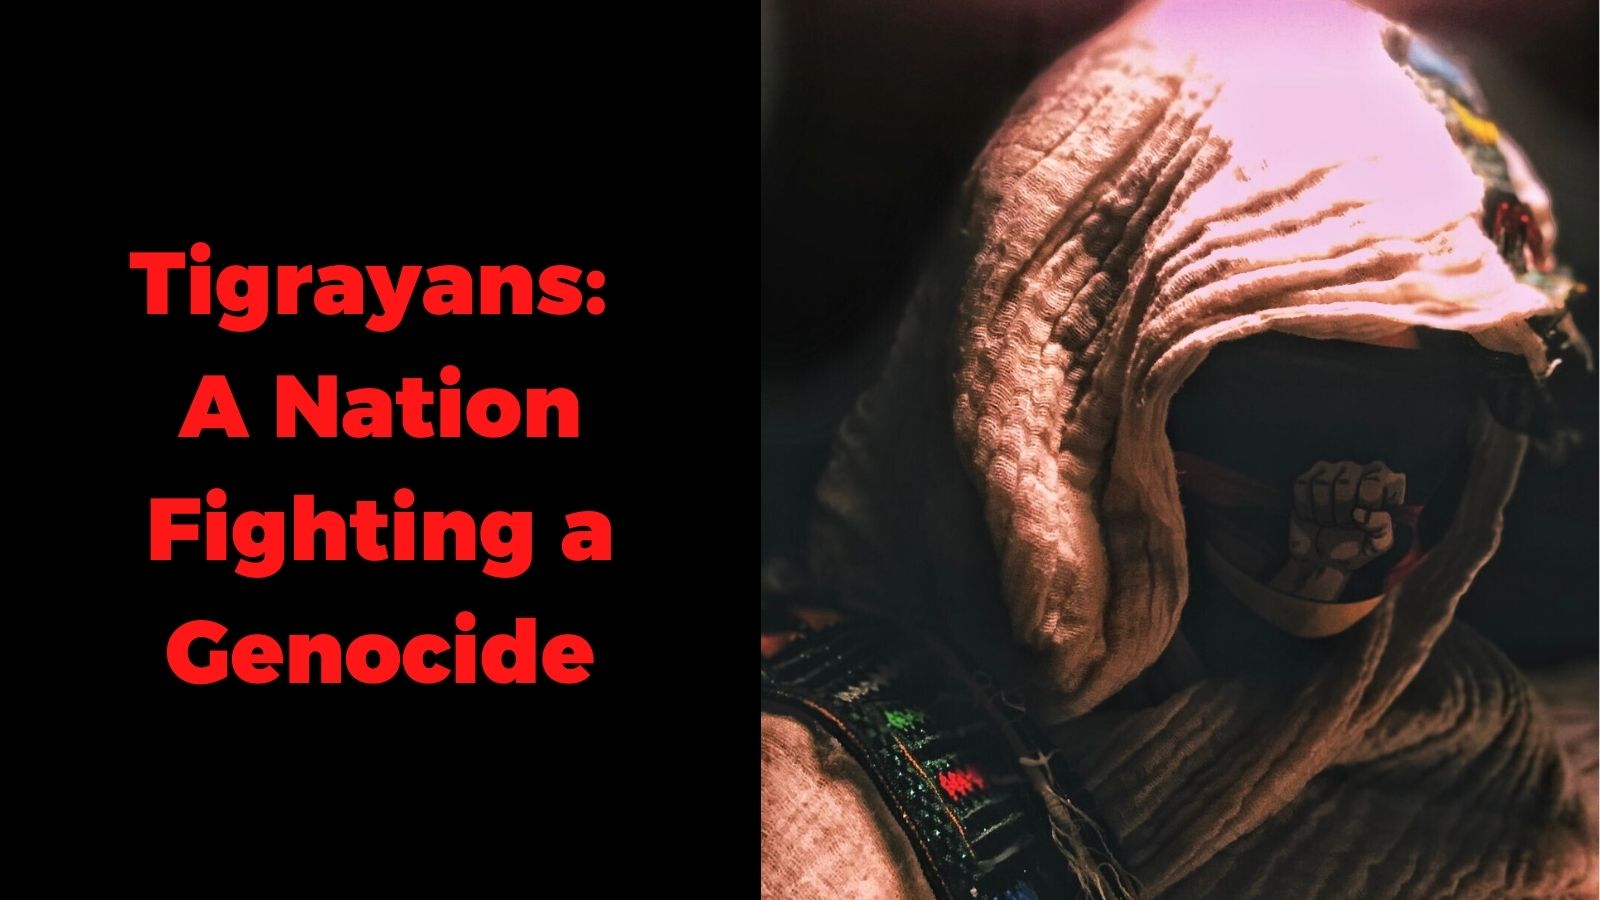 Tigrayans: A Nation Fighting a Genocide